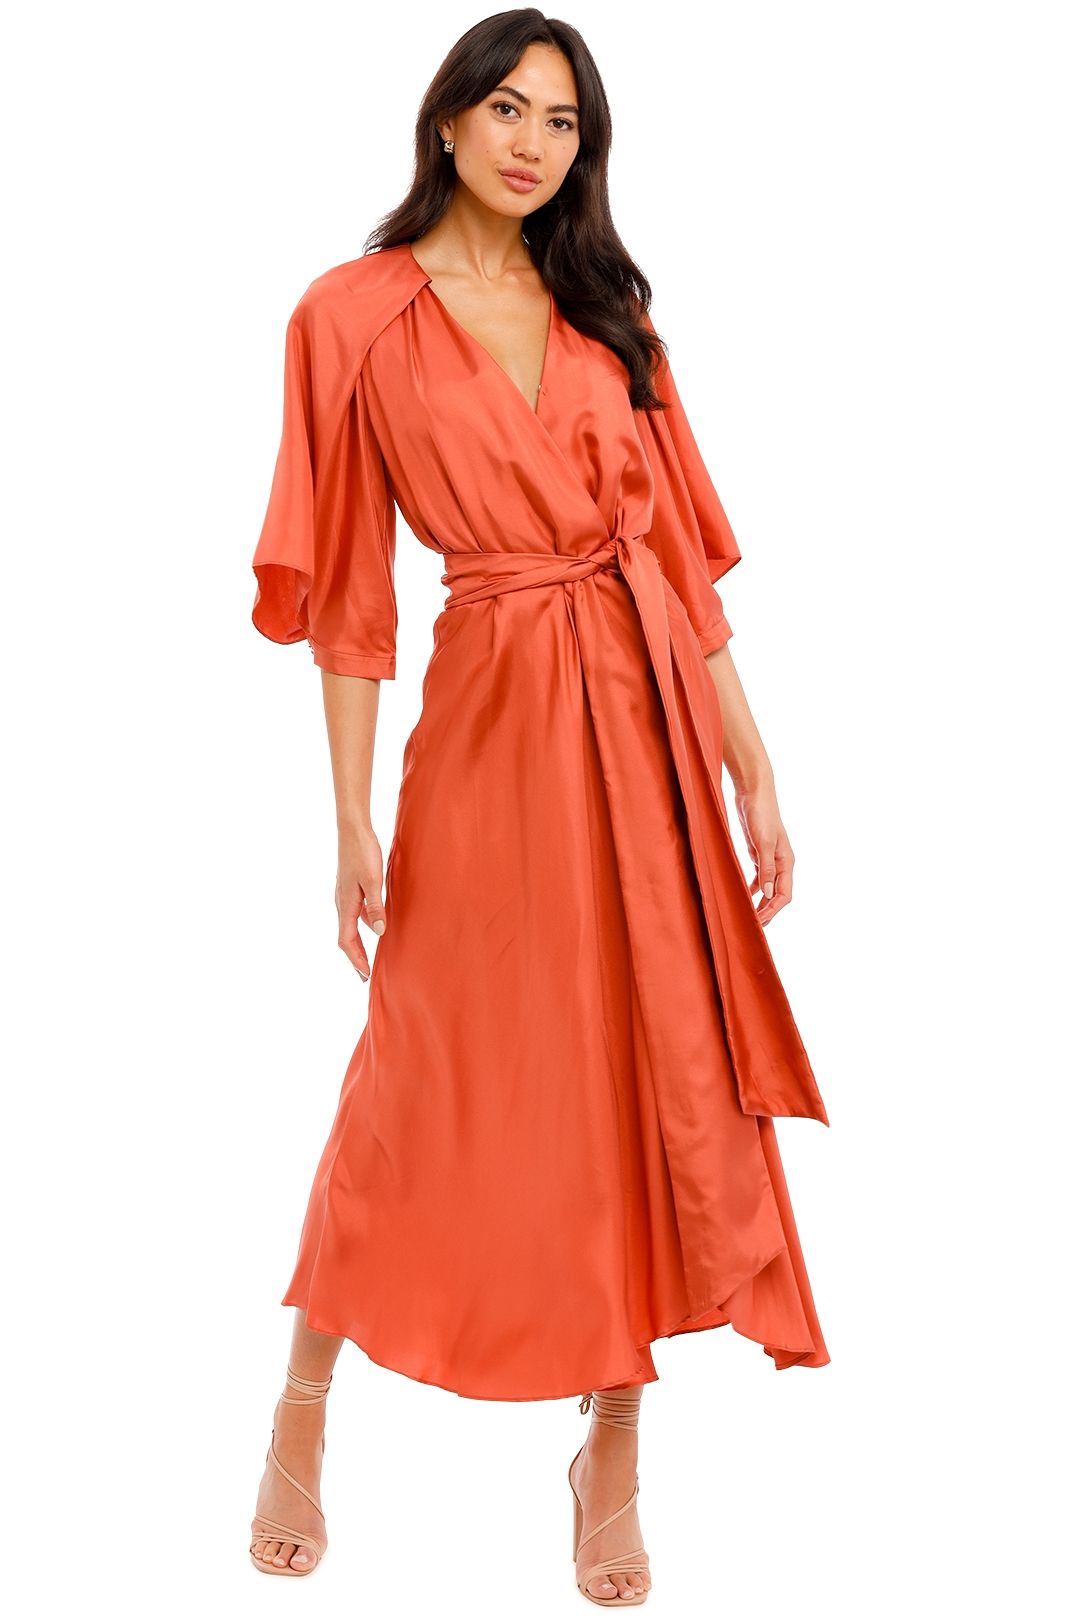 Ginger and Smart Blush Wrap Dress Sunset Pink red